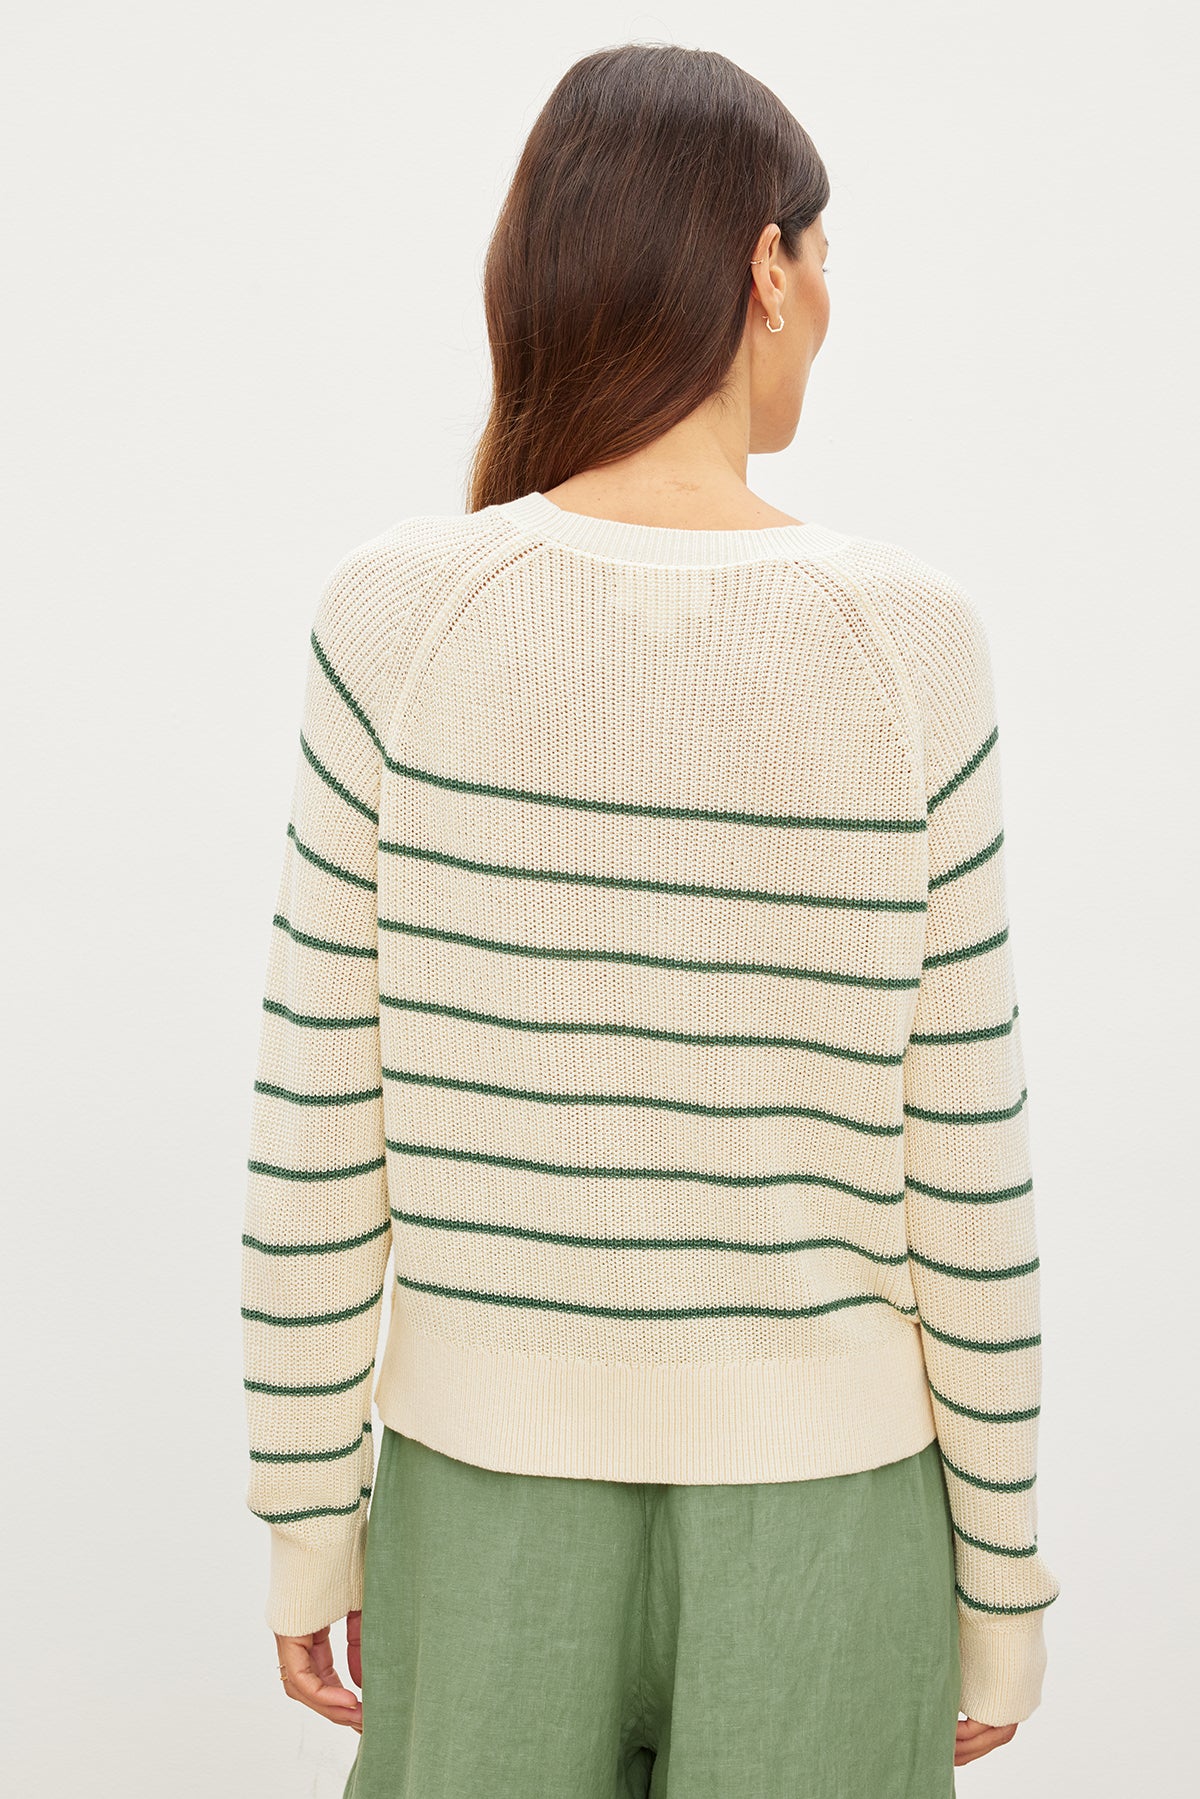 The back view of a woman wearing a Velvet by Graham & Spencer CHAYSE STRIPED CREW NECK SWEATER.-35955537117377